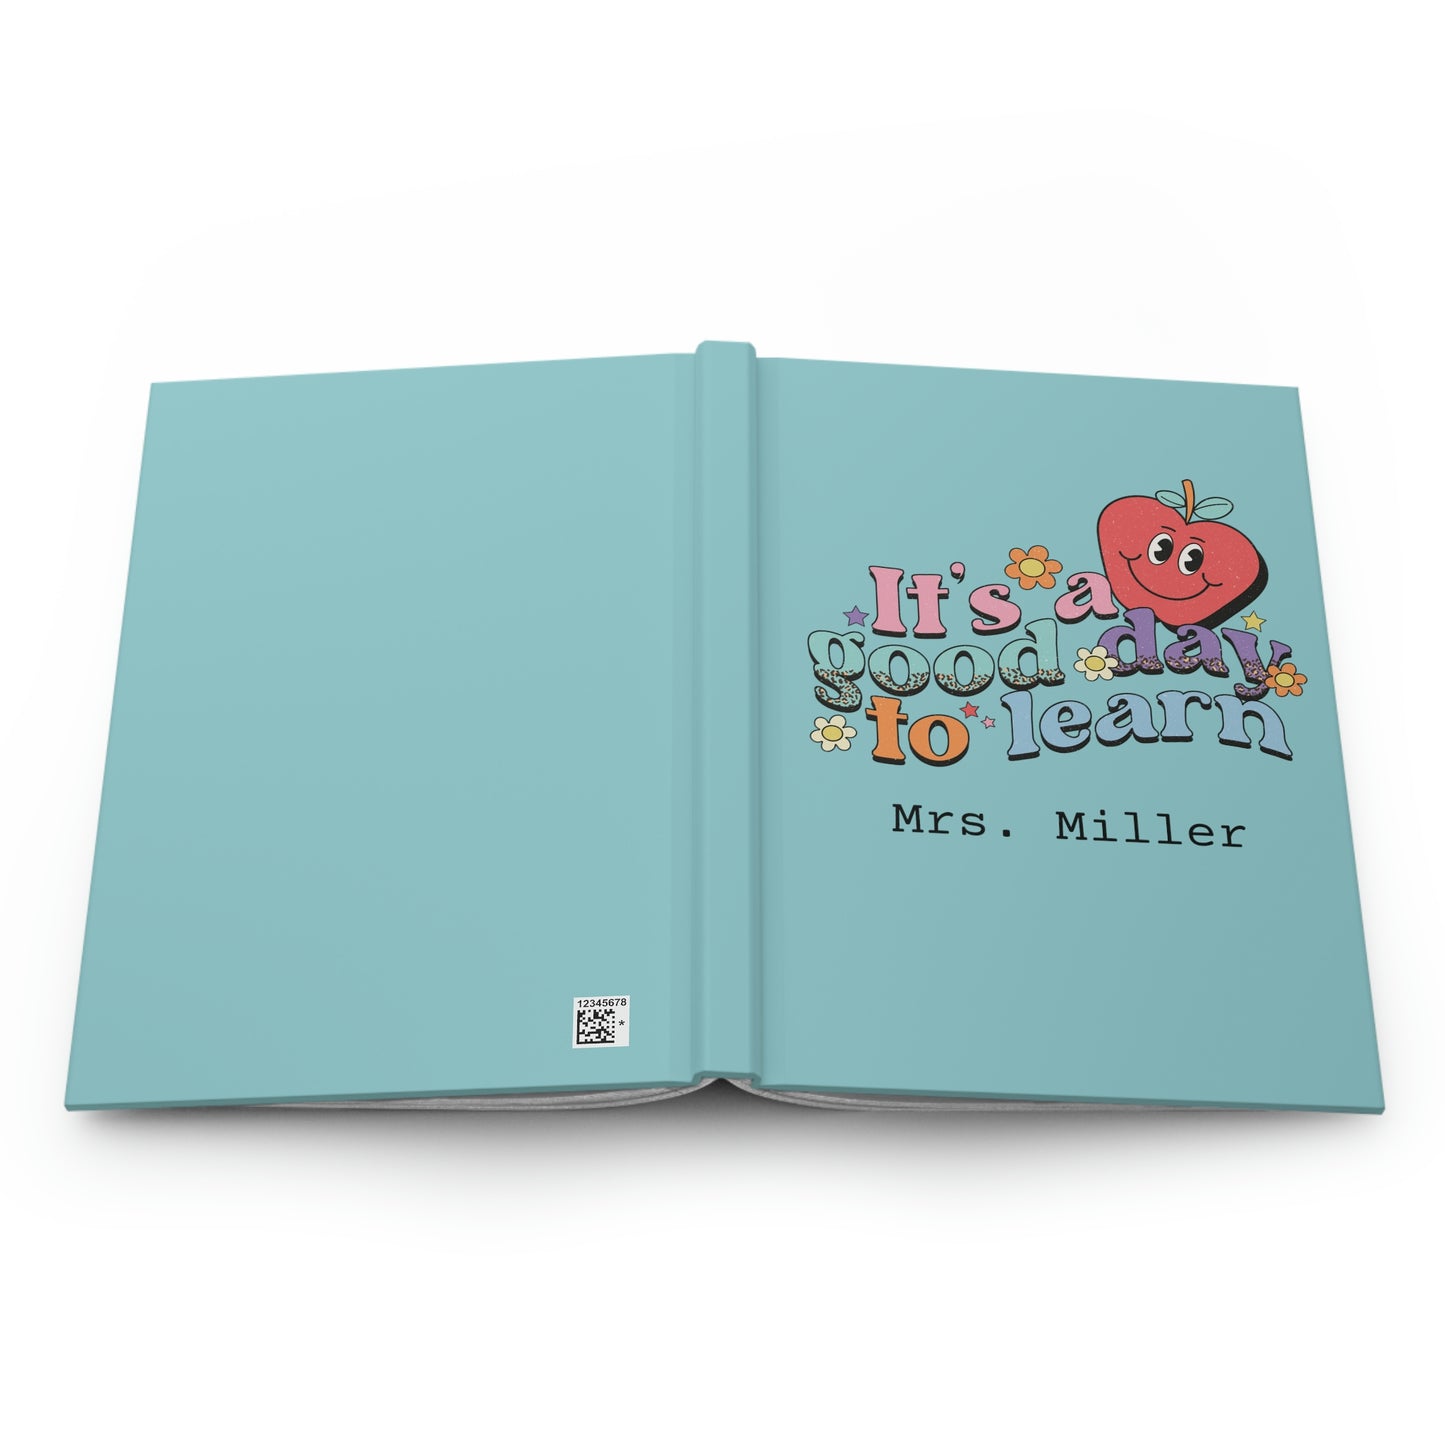 Its A Good Day To Learn - Personalized Teacher Book